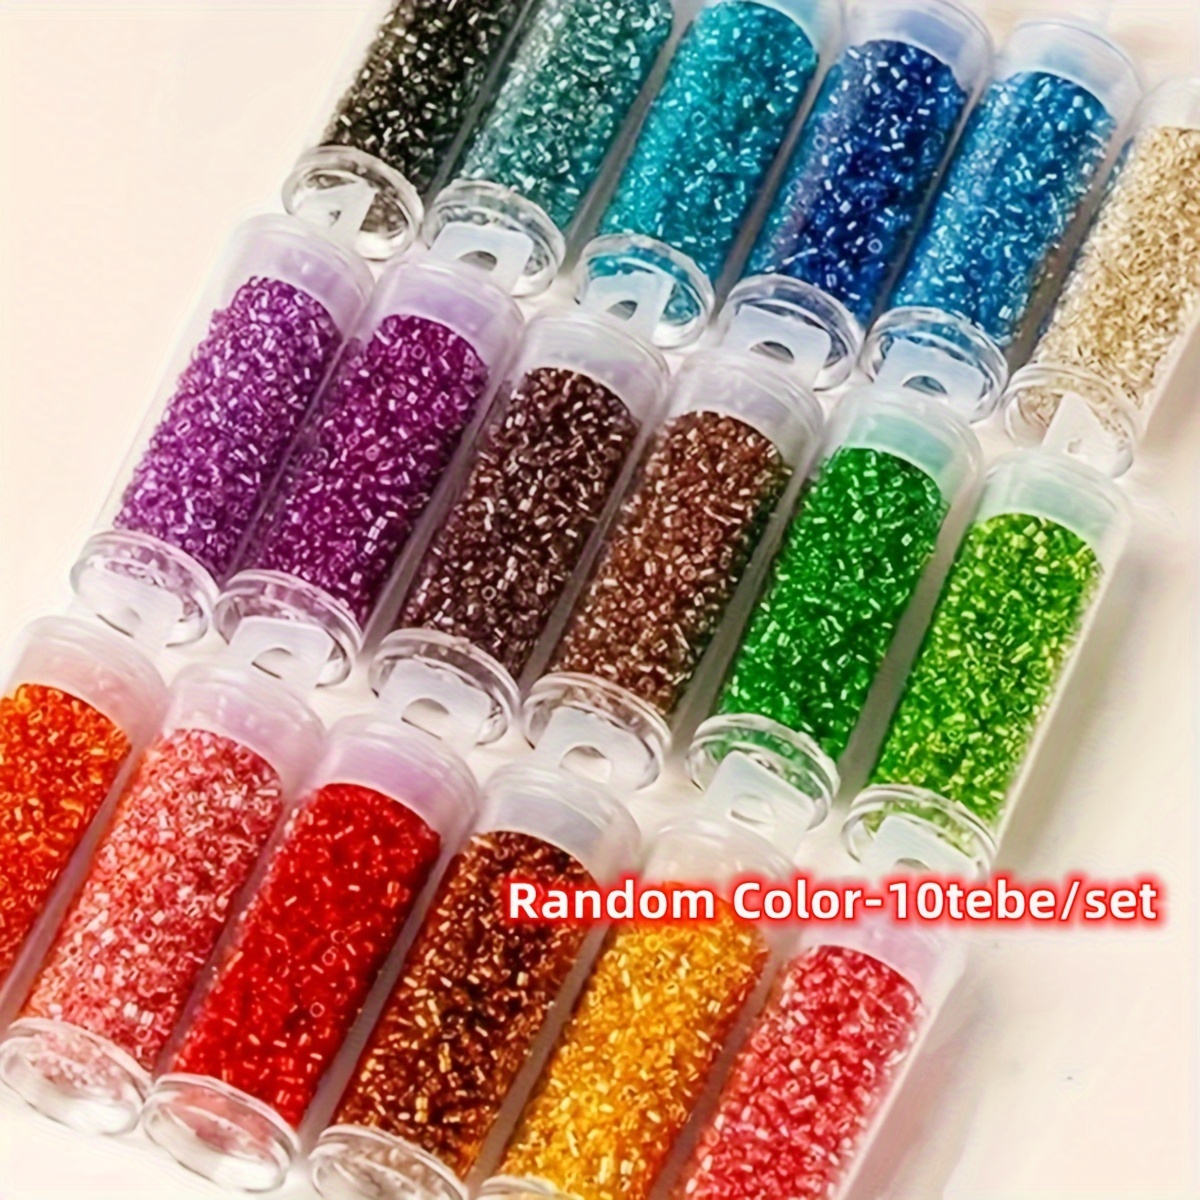 

10 Tube/set 2mm Boho Style Glass Seed Beads For Jewelry Making Random Multiple Colors Slivery-lined Uniform Garment Embroidery Decors Handmade Accessories